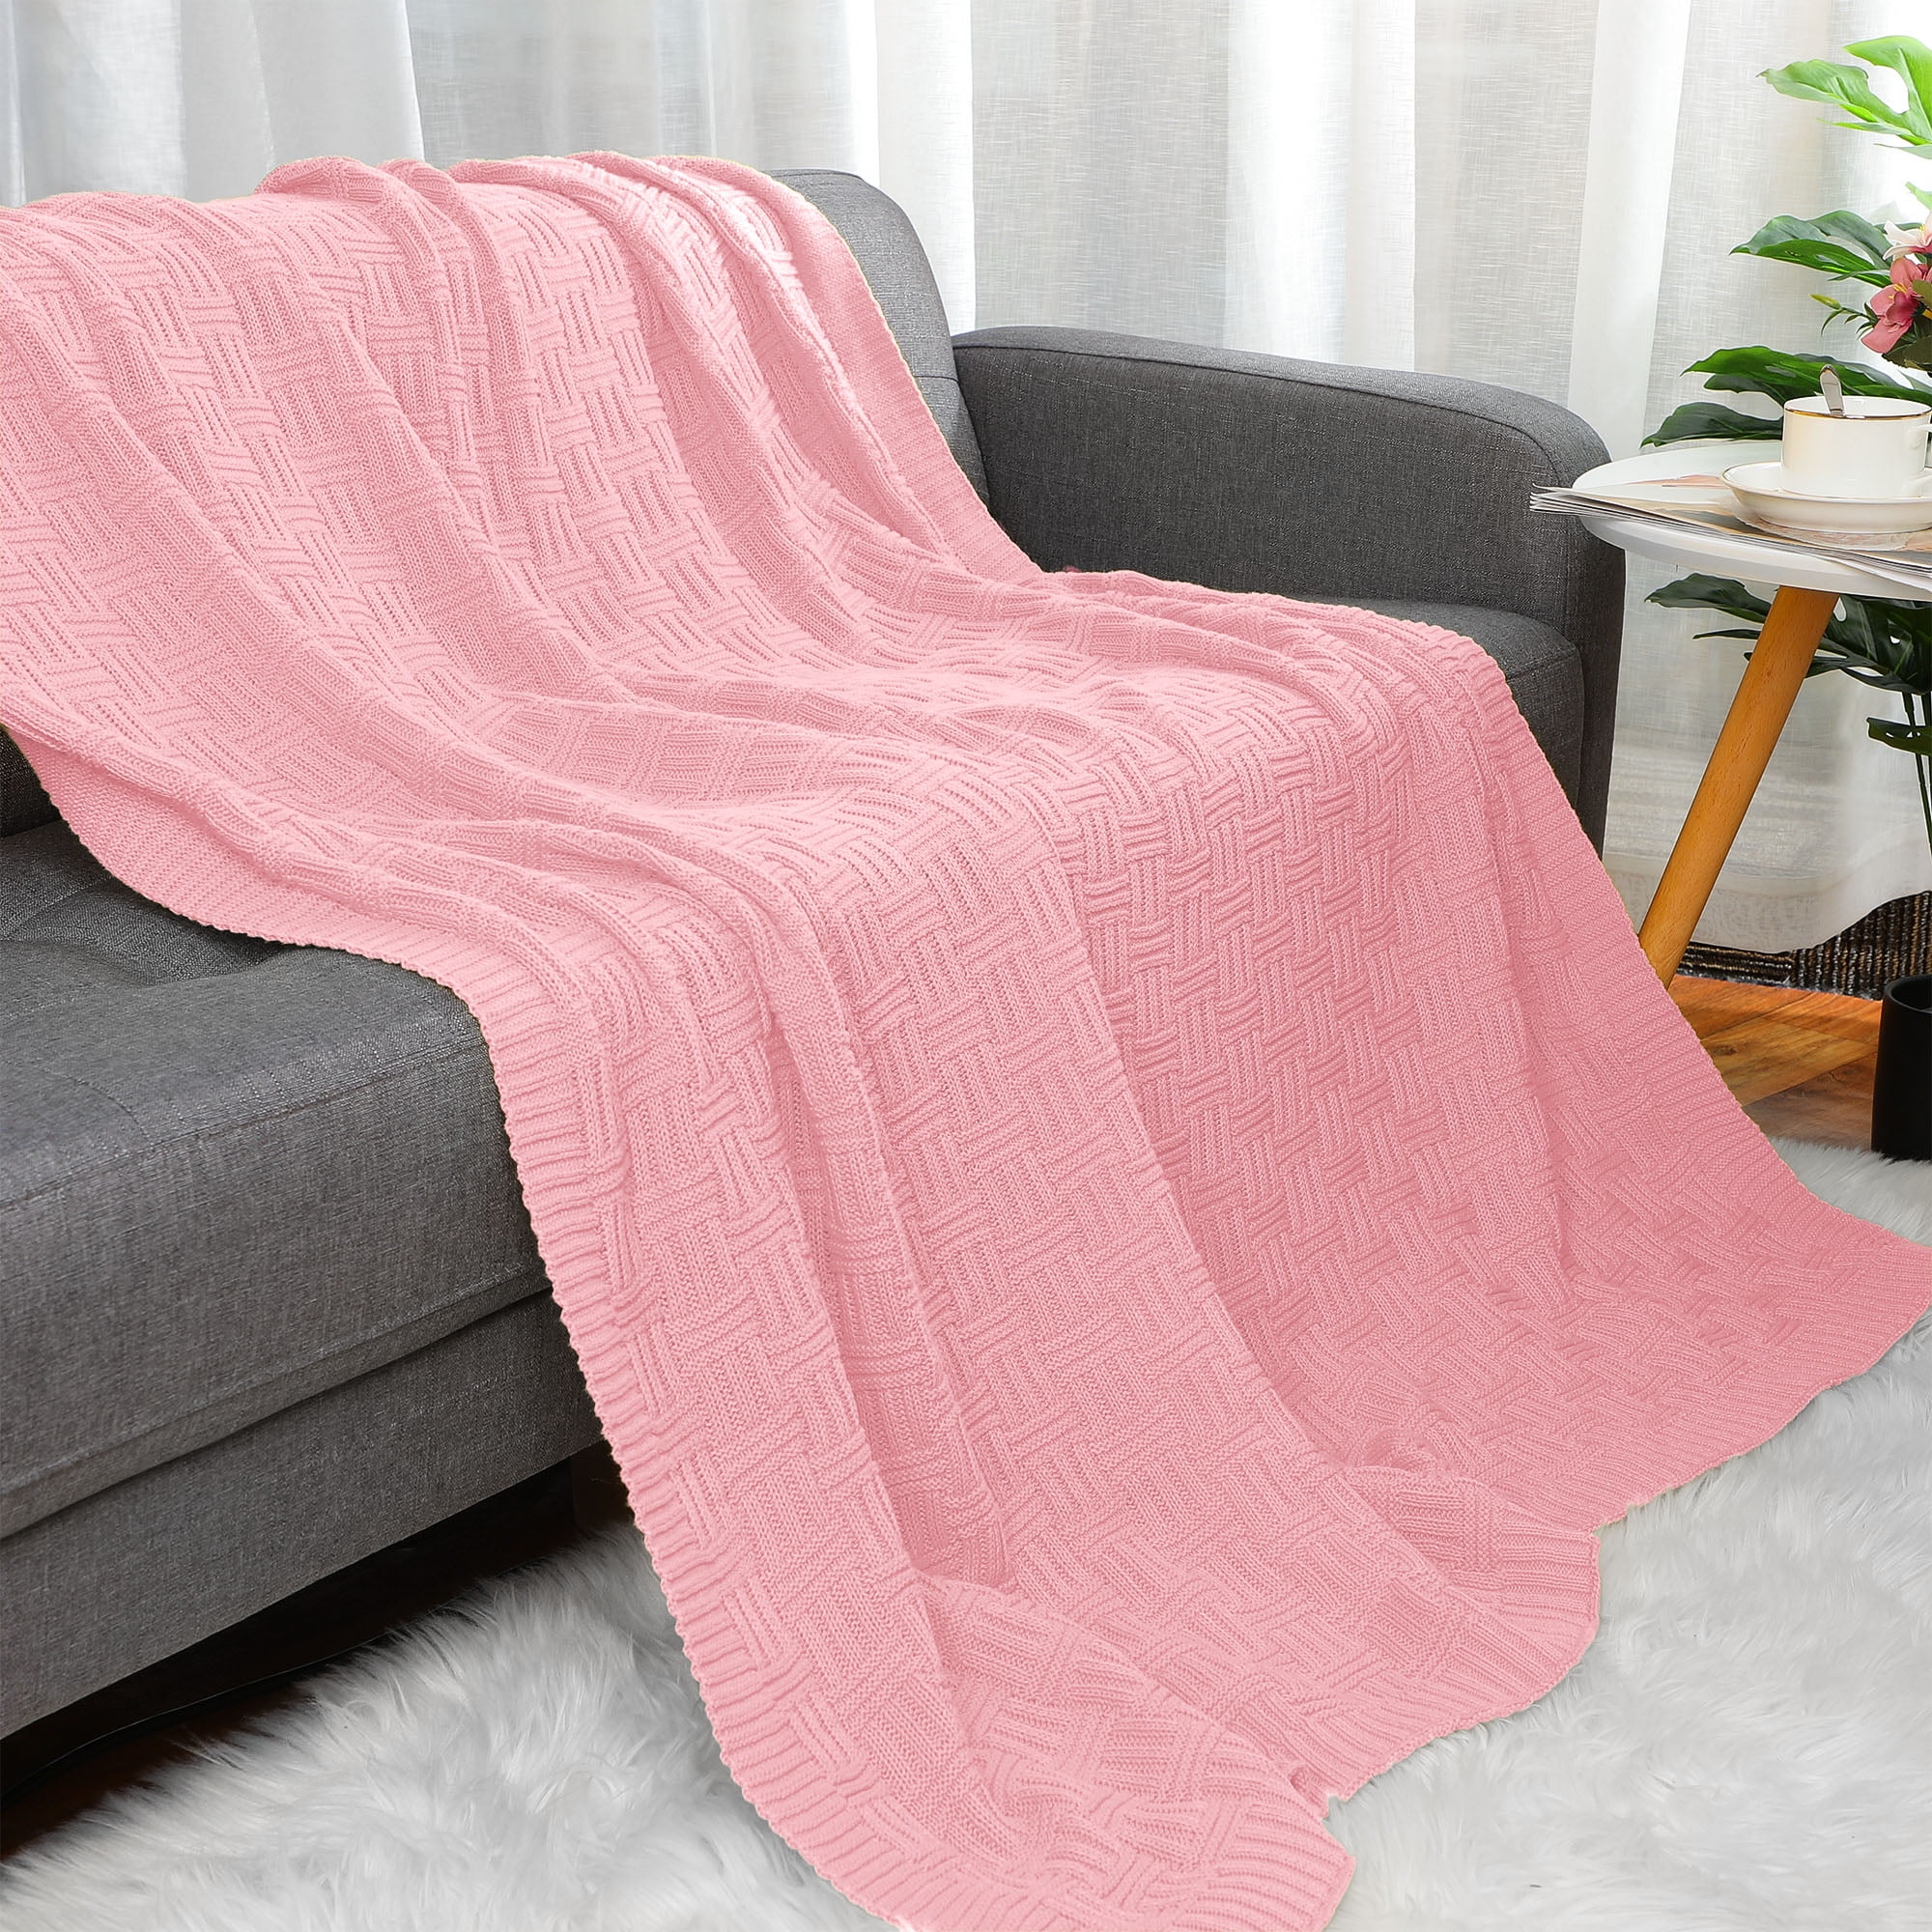 Knitted Throw Blanket 47 X 70 For Sofa Couch Soft 100 Cotton Home Light Pink Walmart Canada